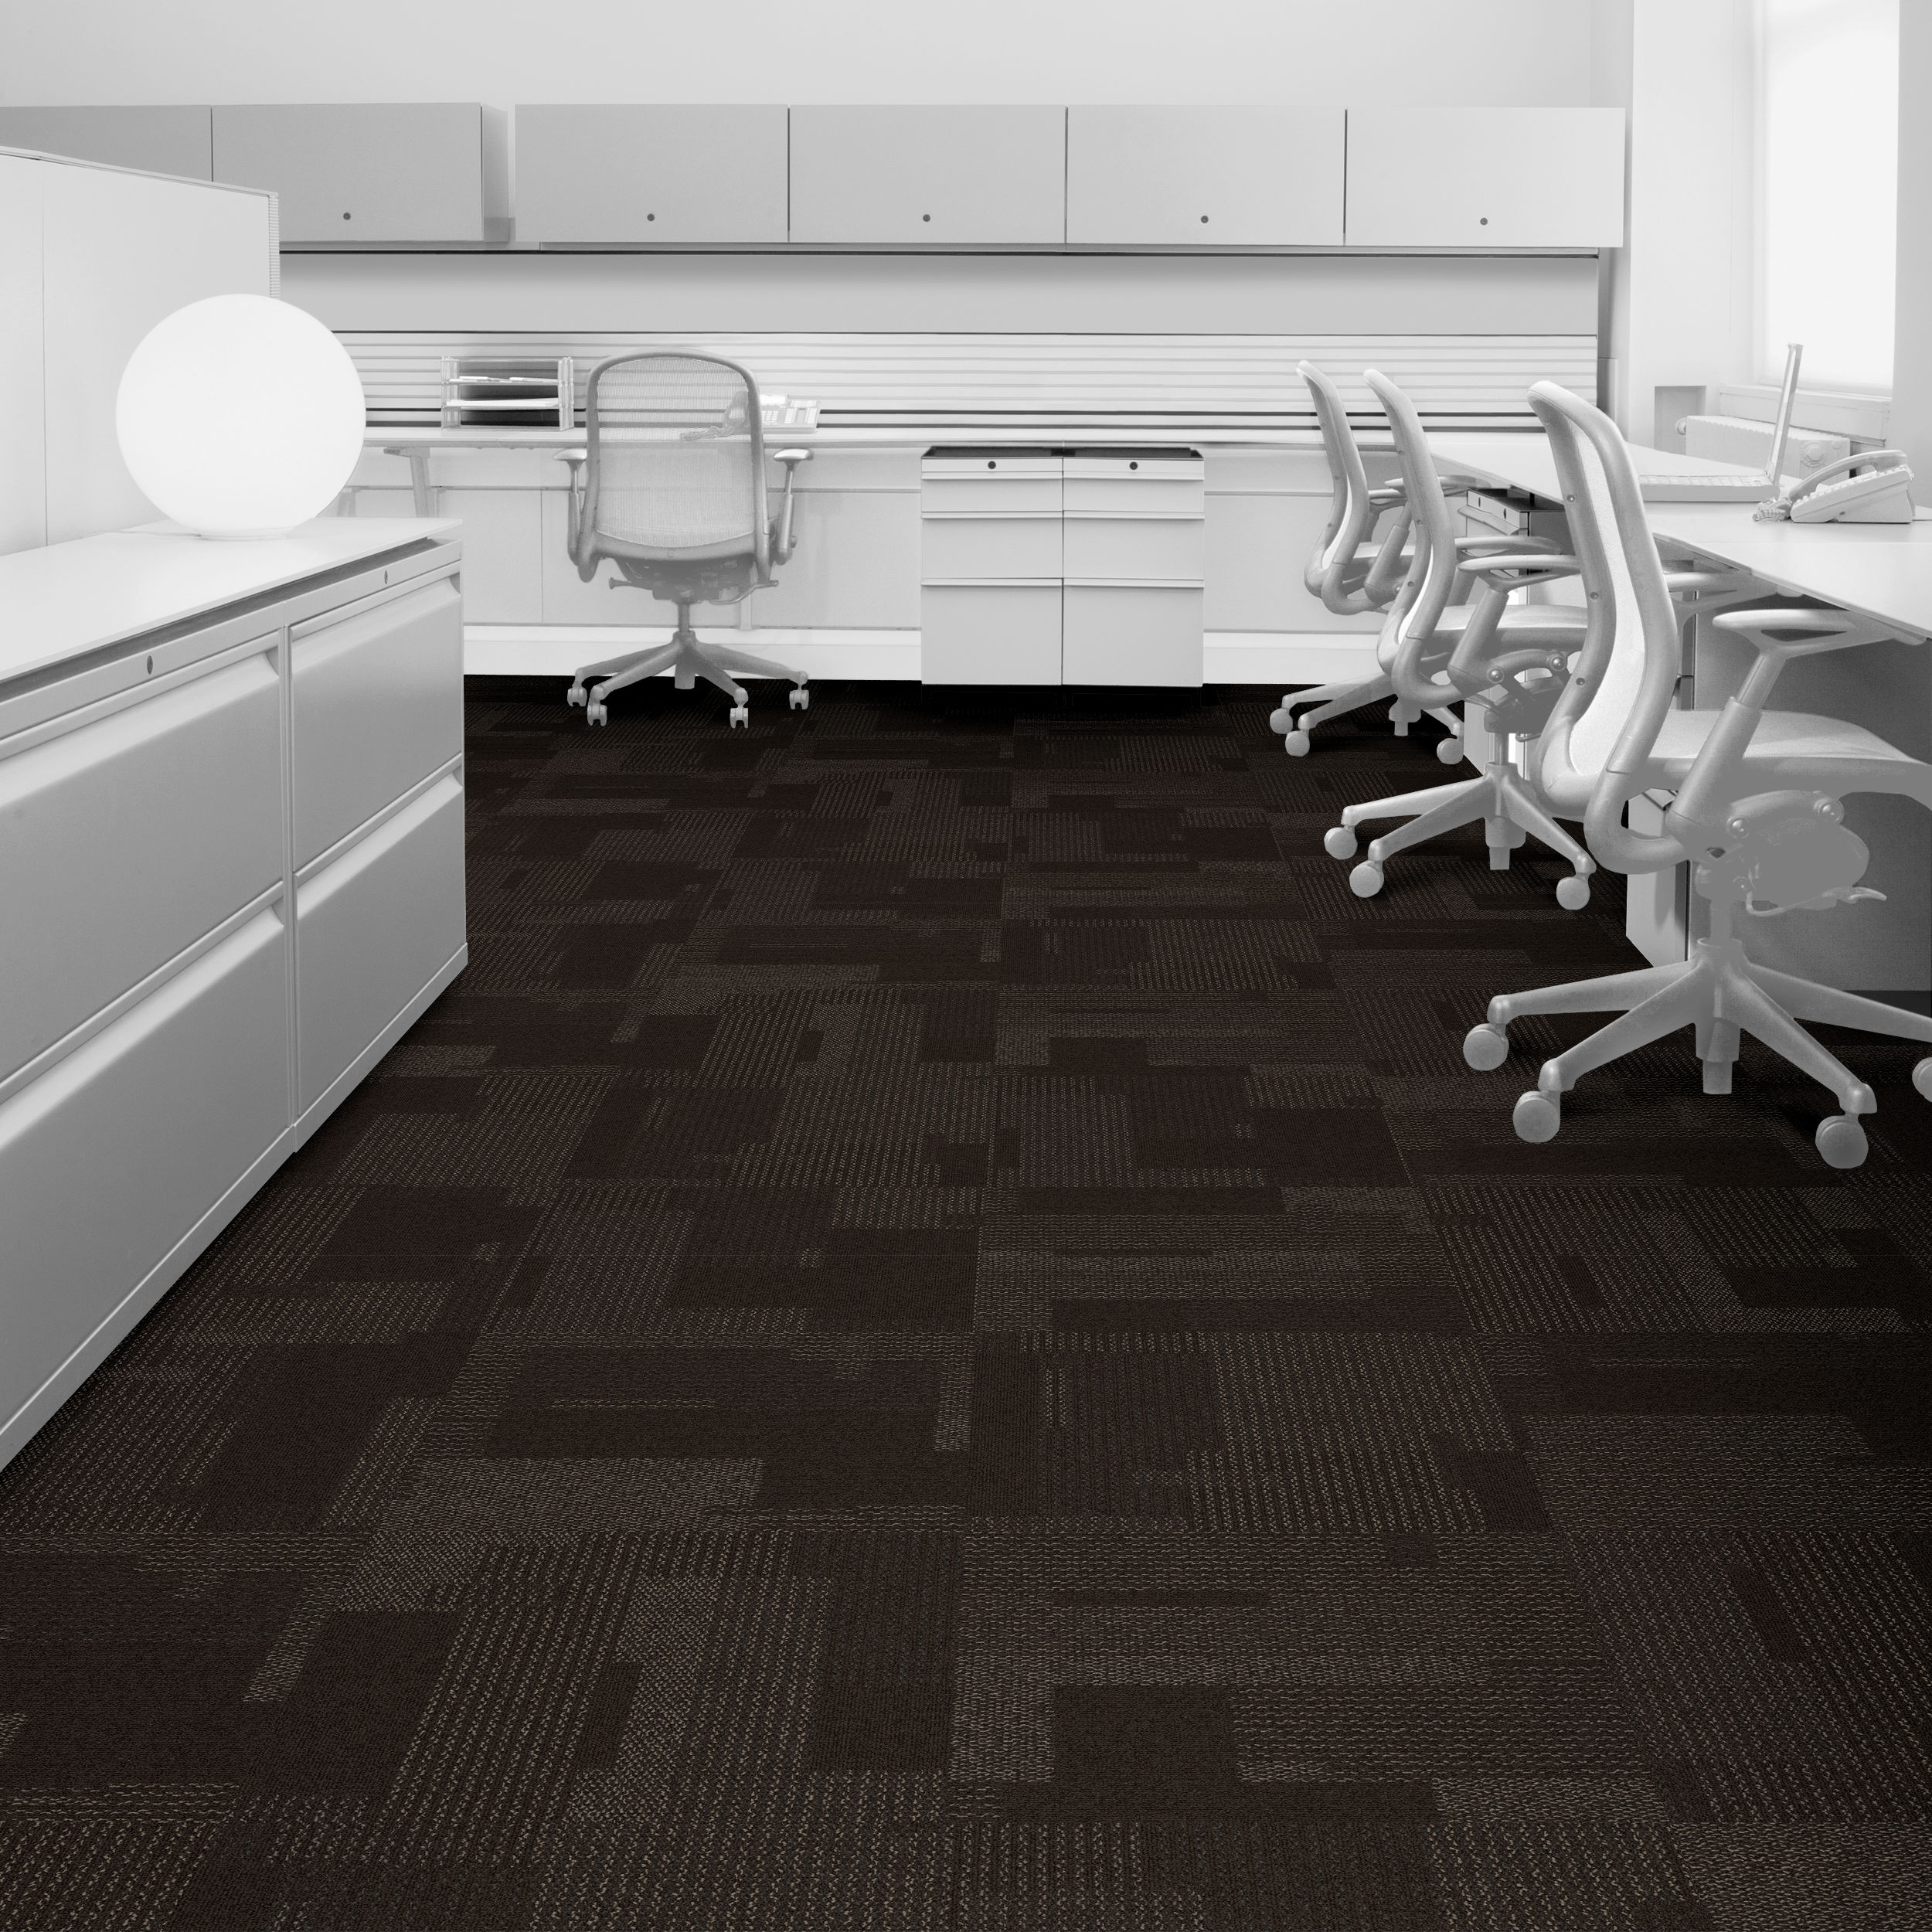 Truffle Transformation Carpet Tile in office setting.